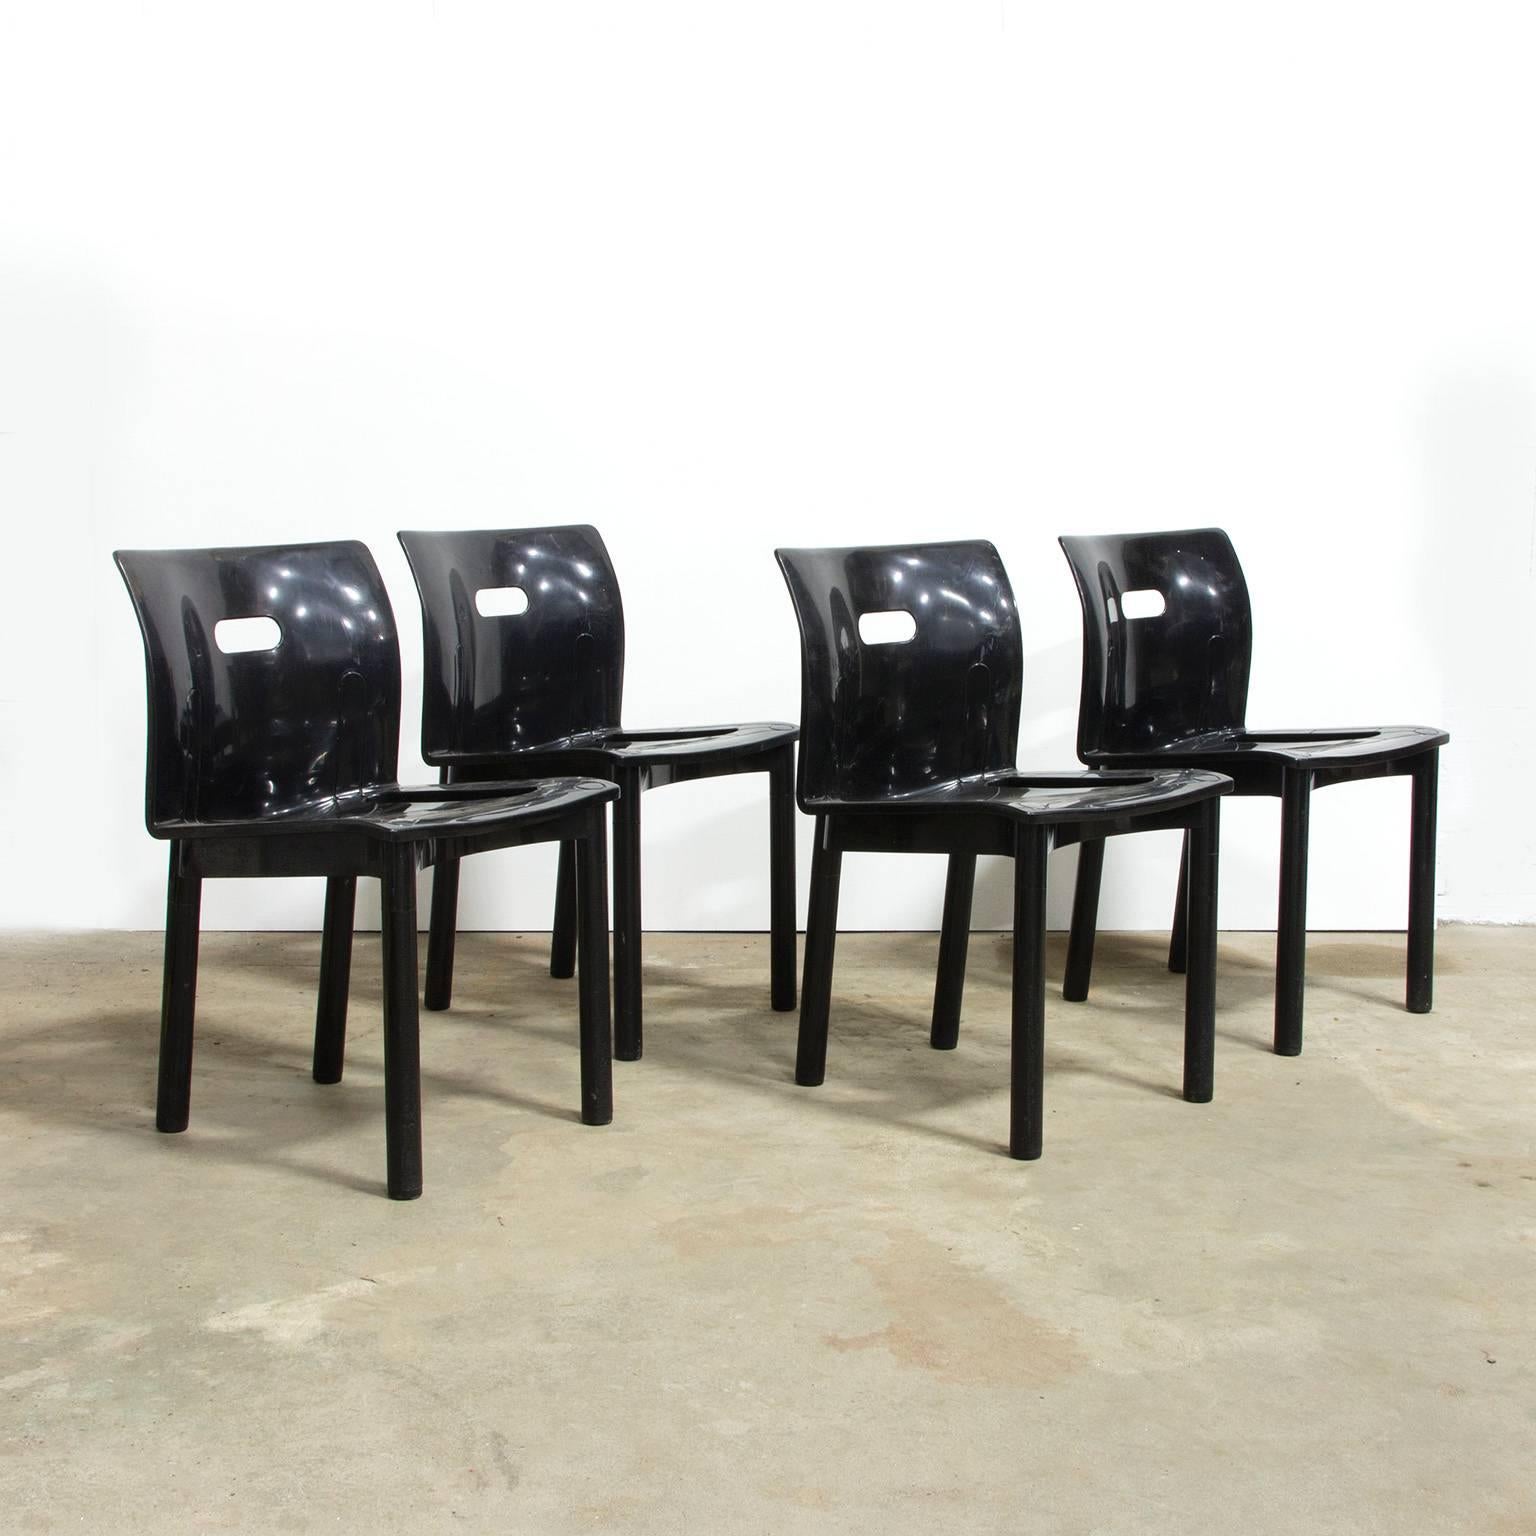 In 1986 those stacking chairs won the Compasso d'Oro in Italy.
The chairs are disassemble by the legs and stackable until a set of four.
This set of 14 plastic stacking chairs, all in good and fair condition, is available as a lot or per